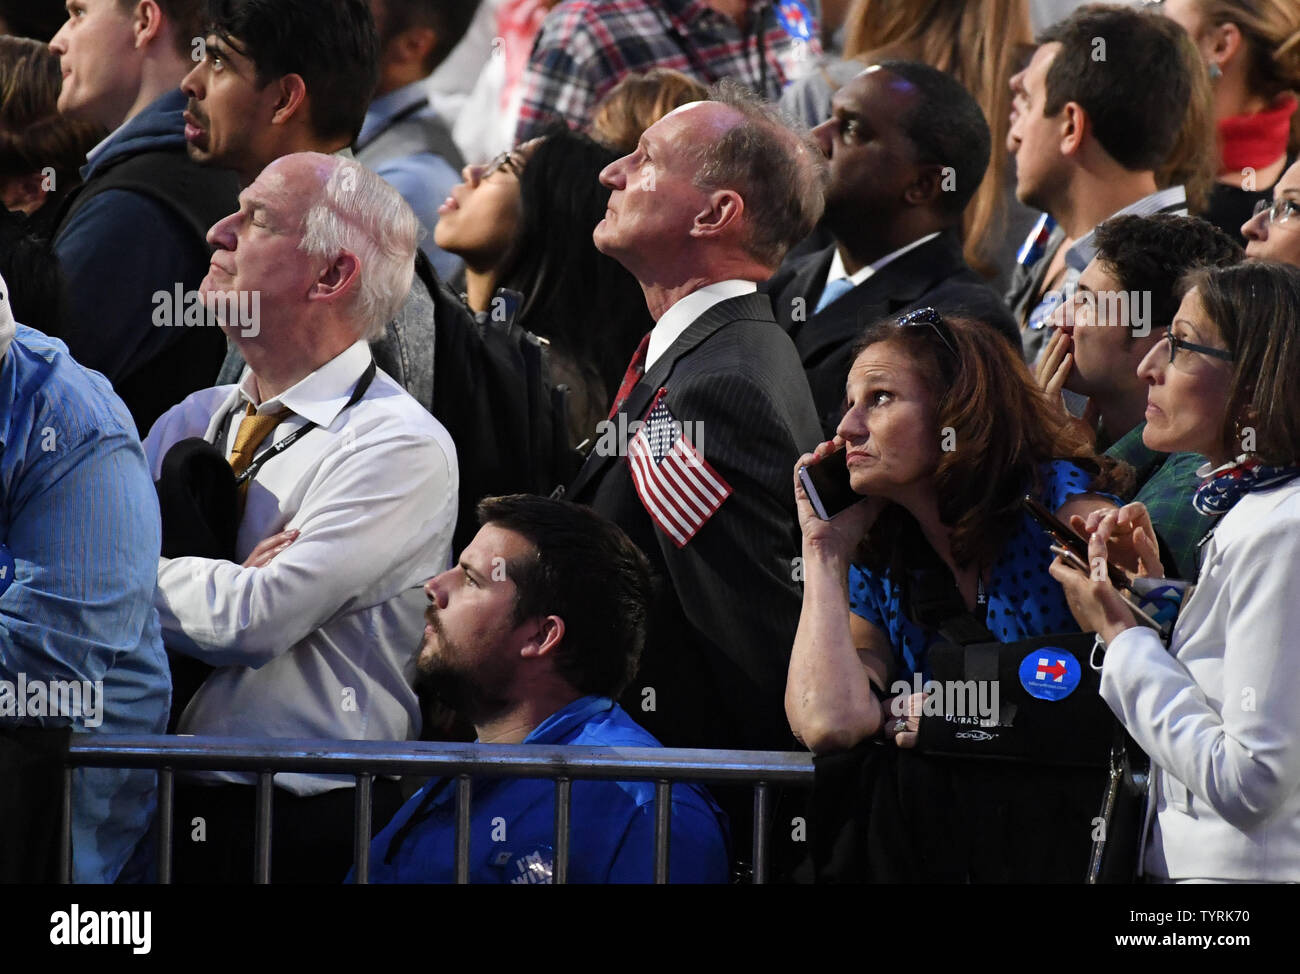 Hillary supporters watch the vote count after midnight at Democratic presidential candidate Hillary Clinton's election night rally at the Javits Center in New York on November 8, 2016.          Photo by Pat Benic/UPI Stock Photo